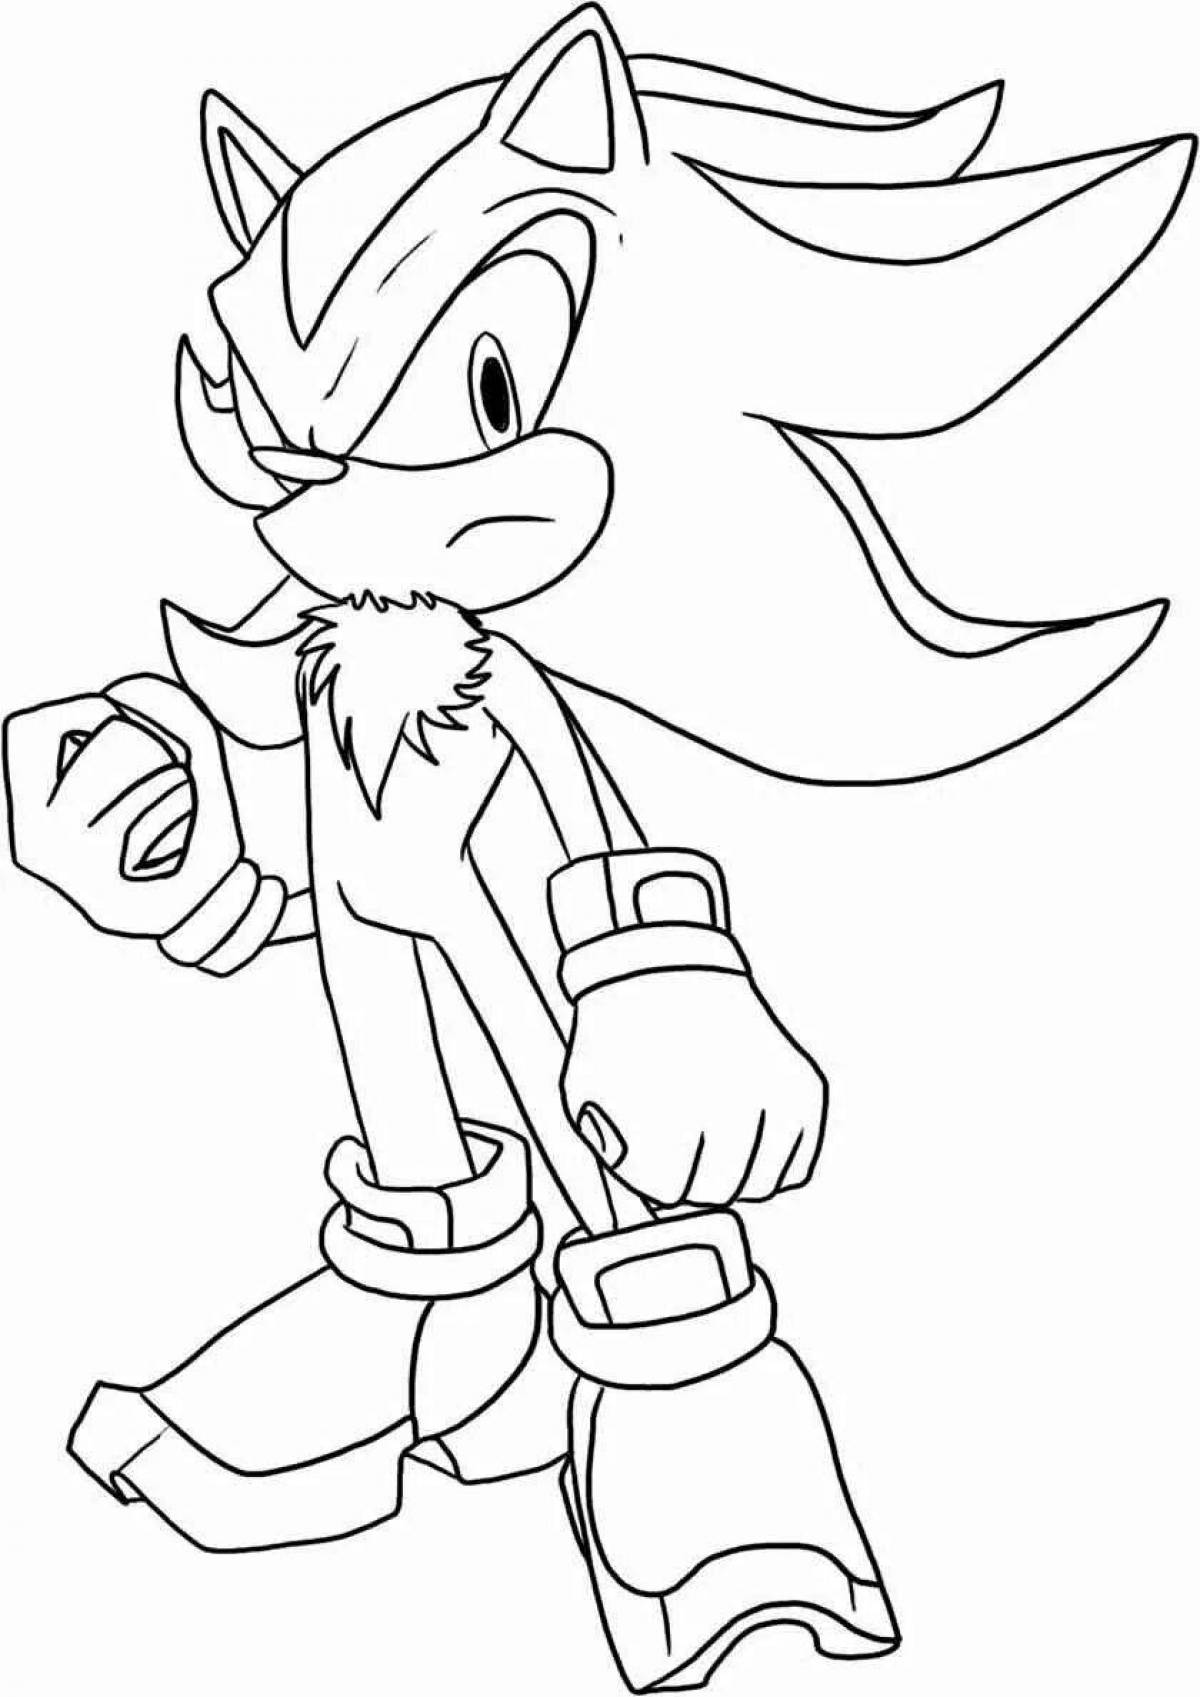 Sonic the hedgehog bold coloring